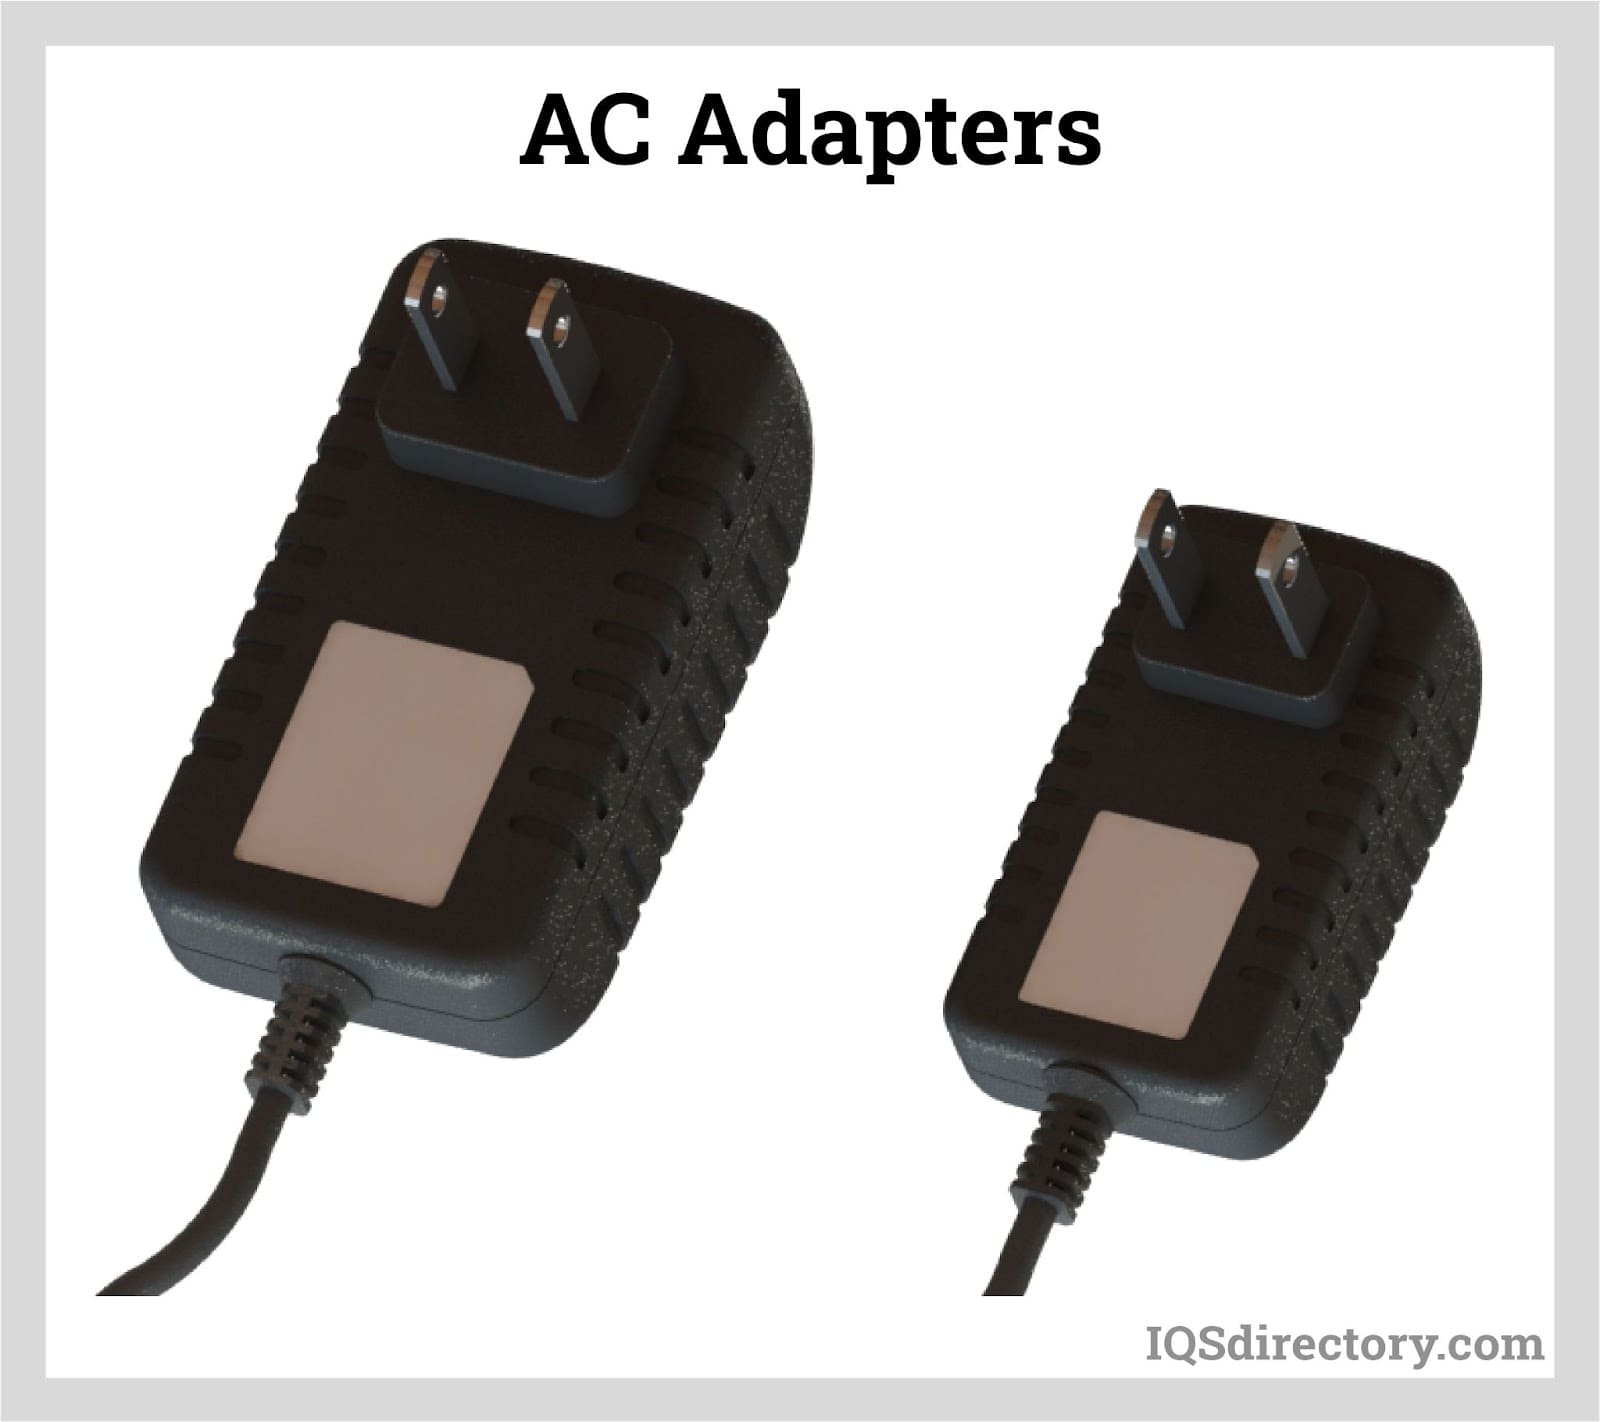 AC Adapters (Wall Plug-In Transformers)